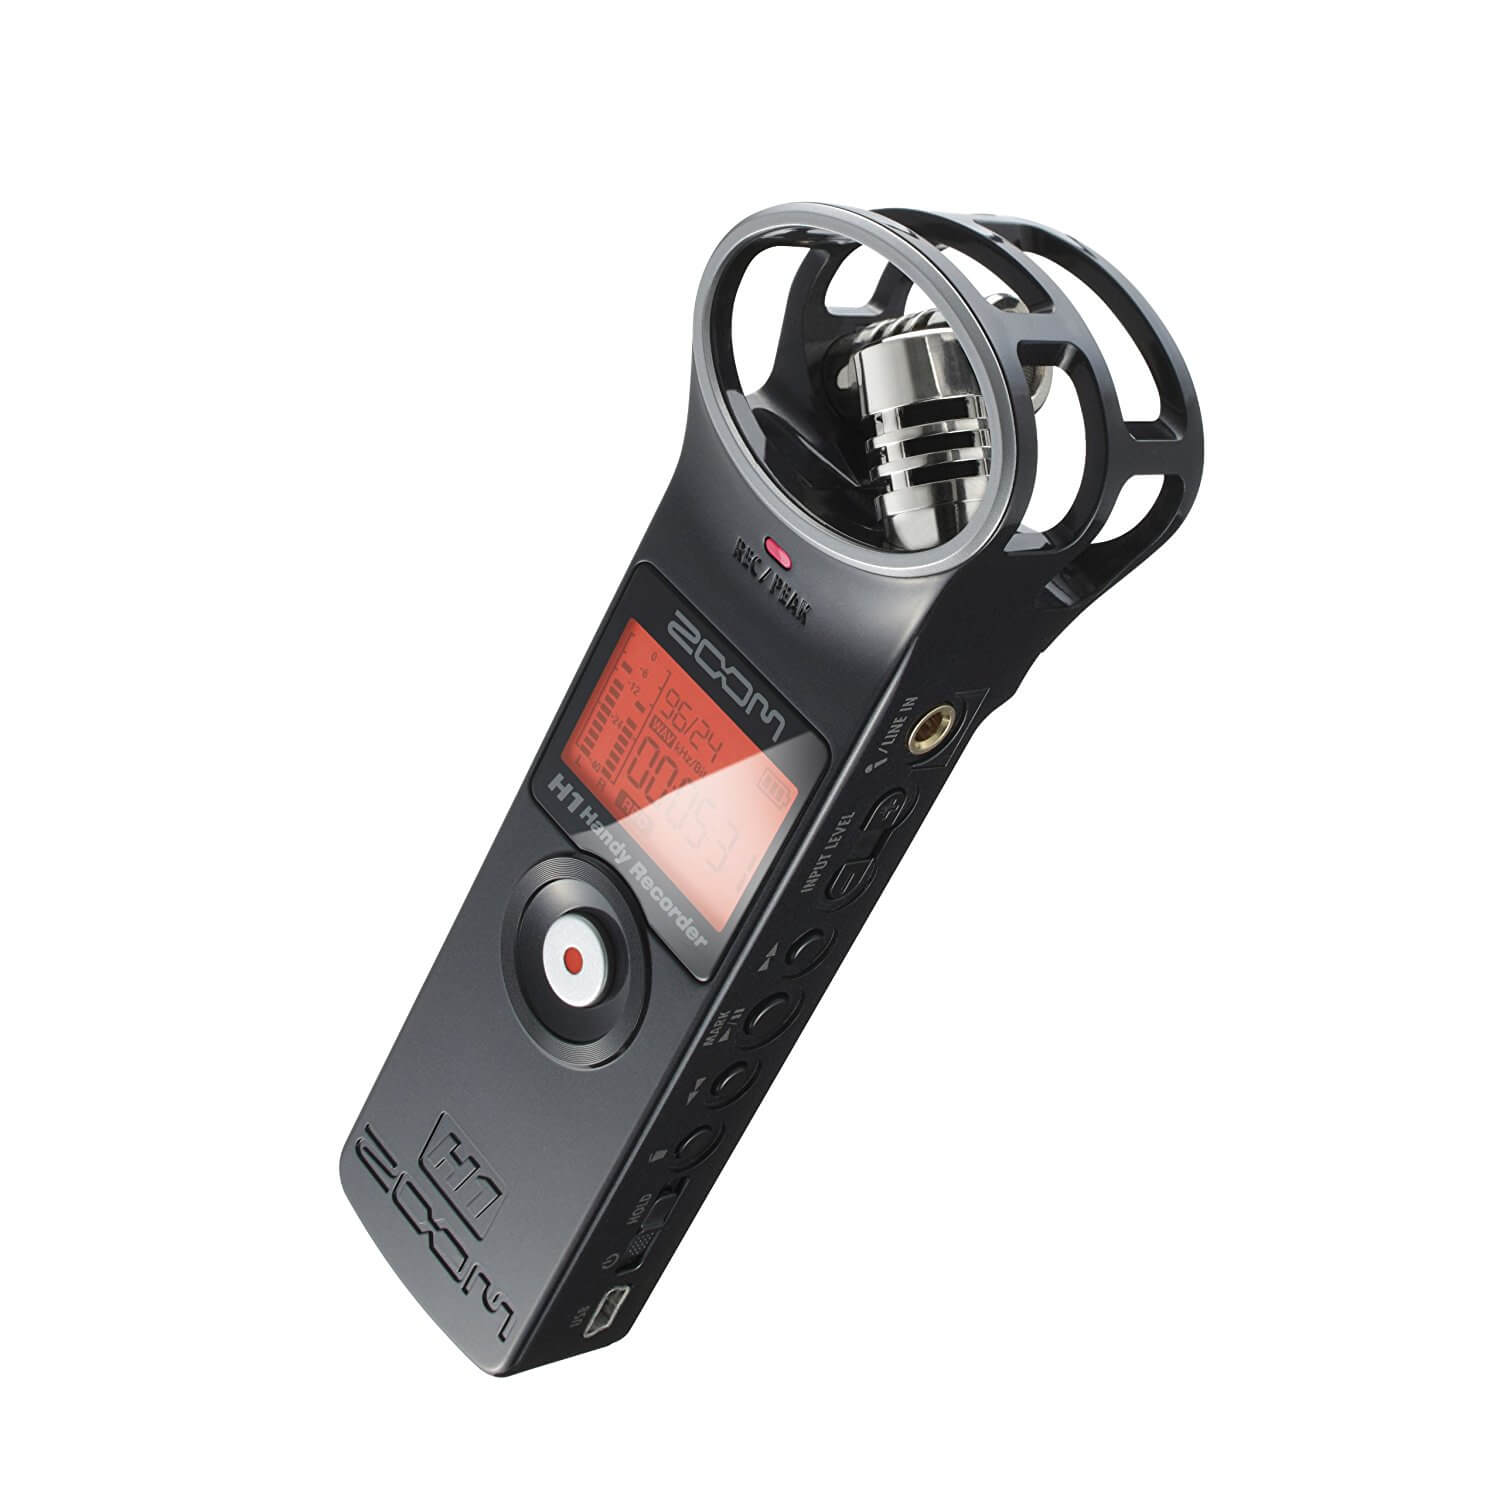  Best Microphone for Interviews: Zoom ZH1 H1 Handy Portable Digital Recorder